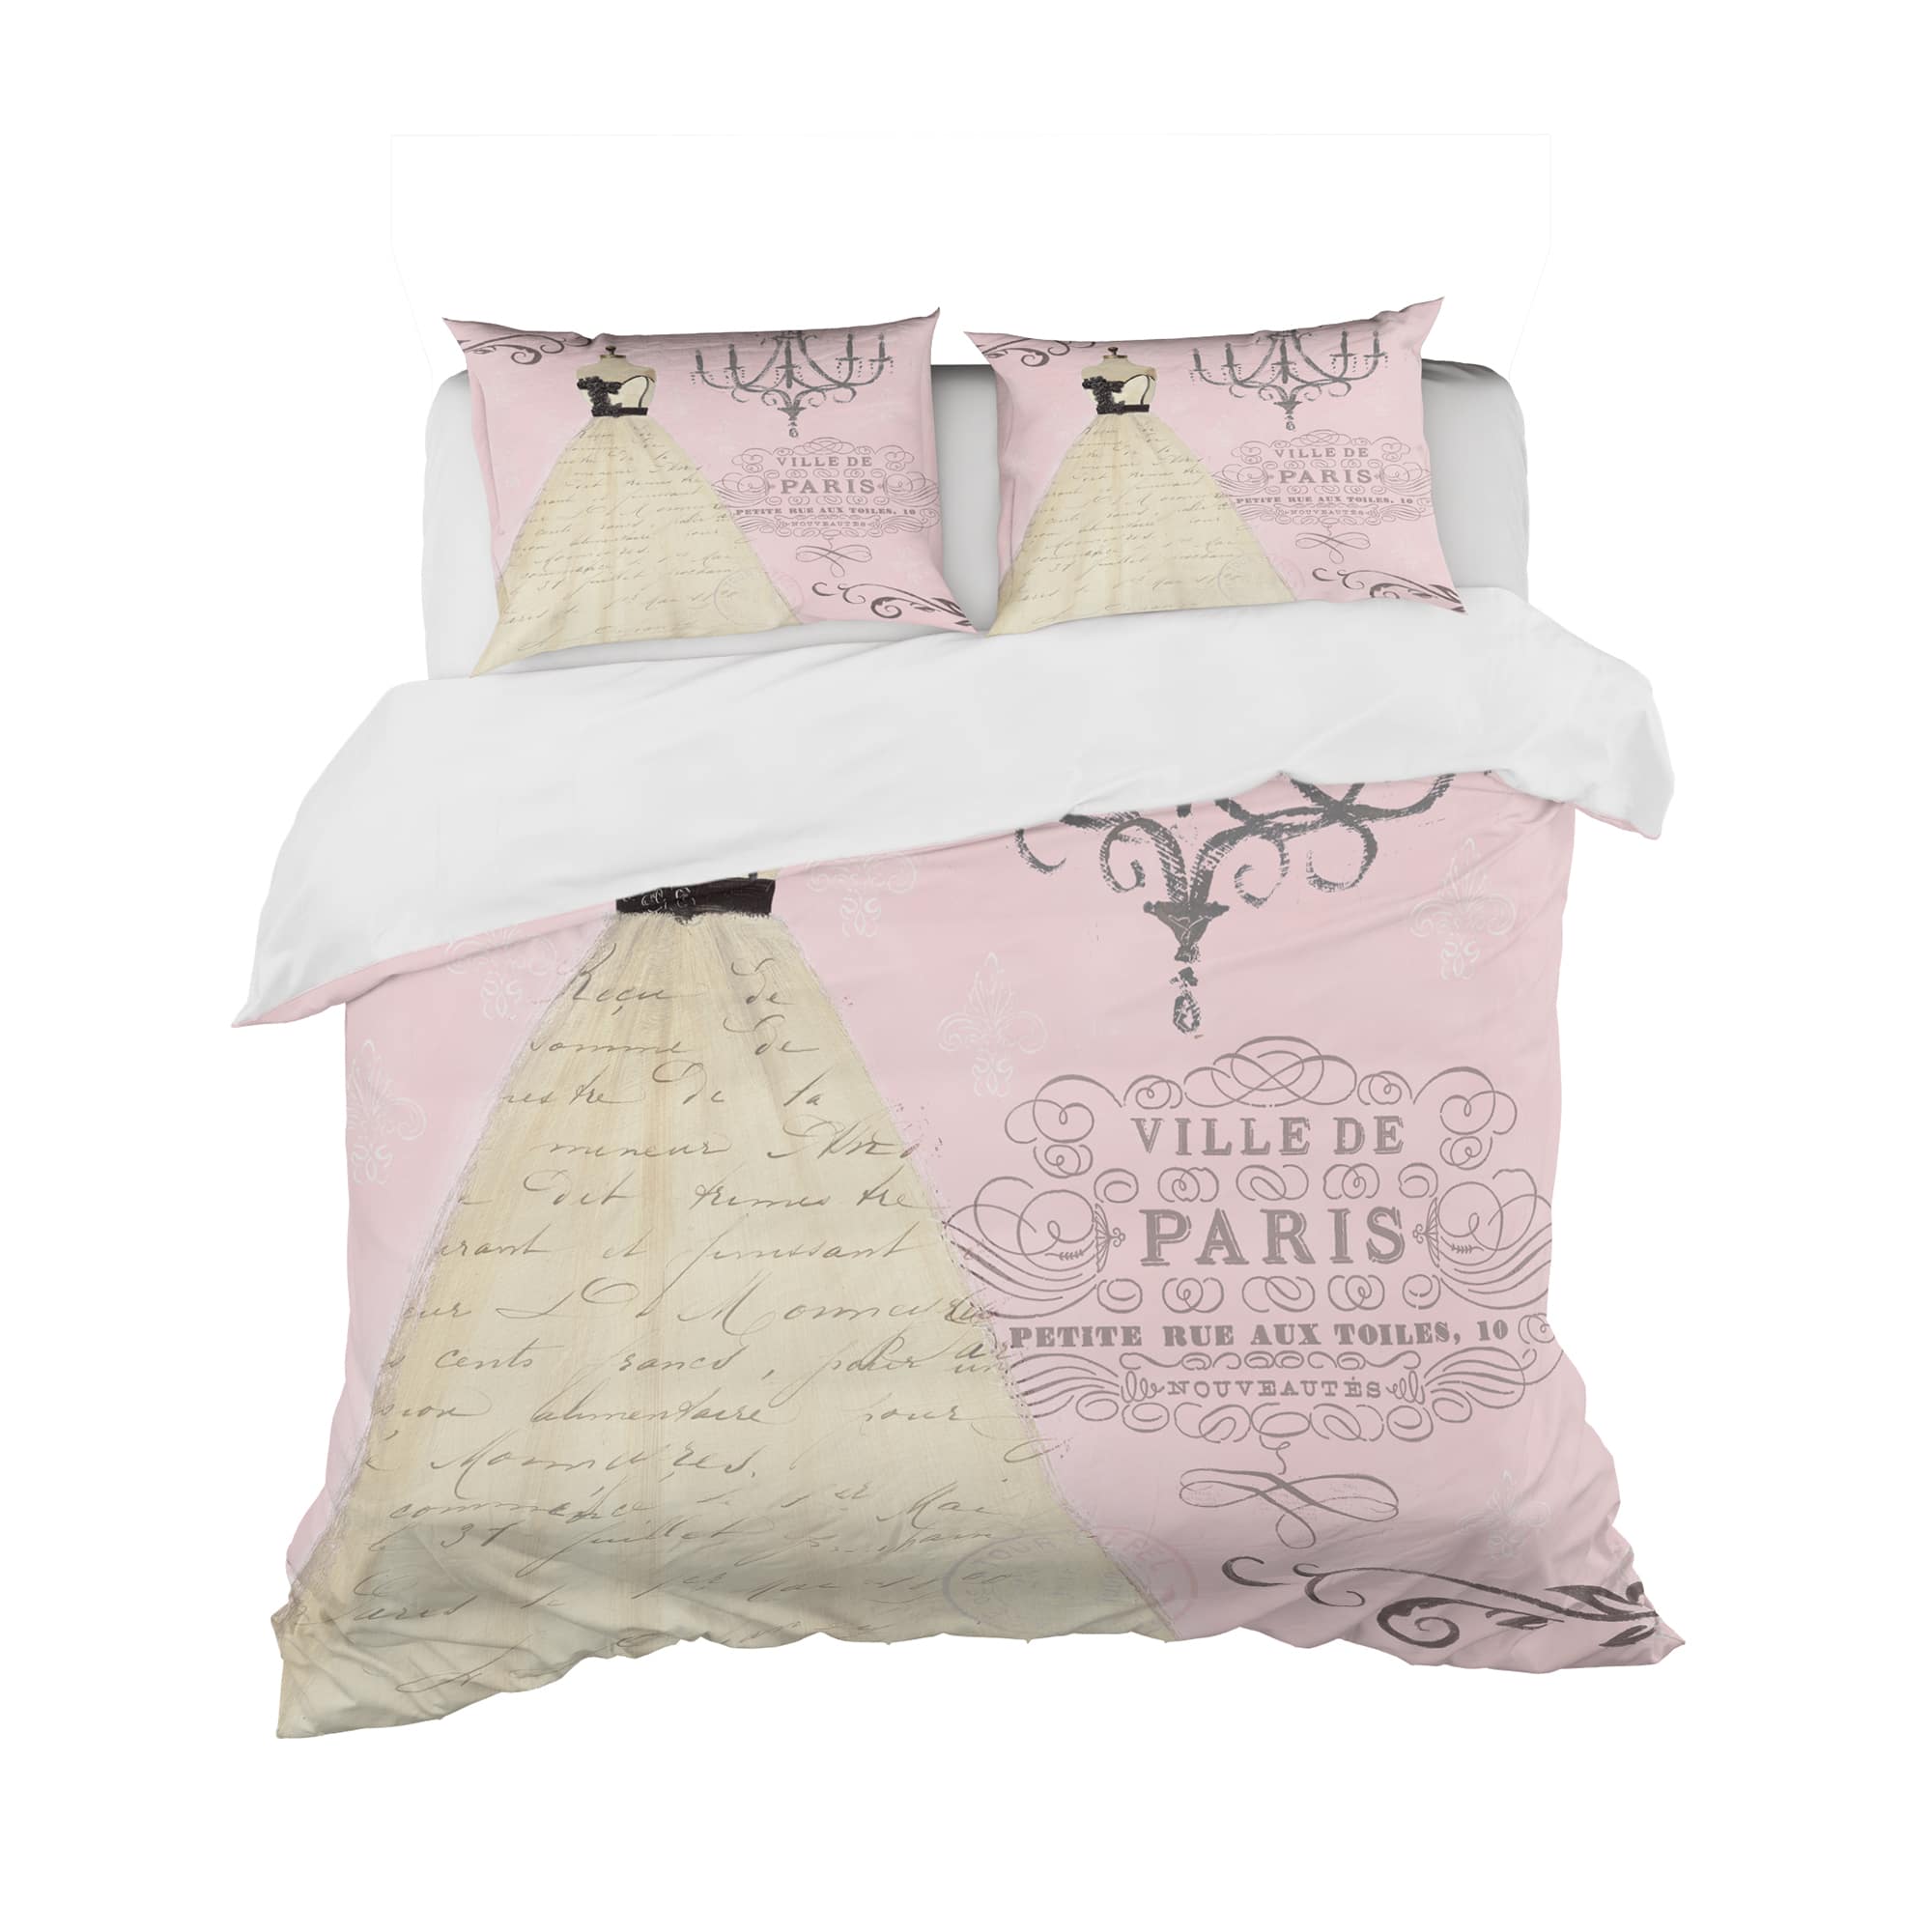 Designart 'Perfume Chanel Five IV' French Country Duvet Cover Set - Full - Queen